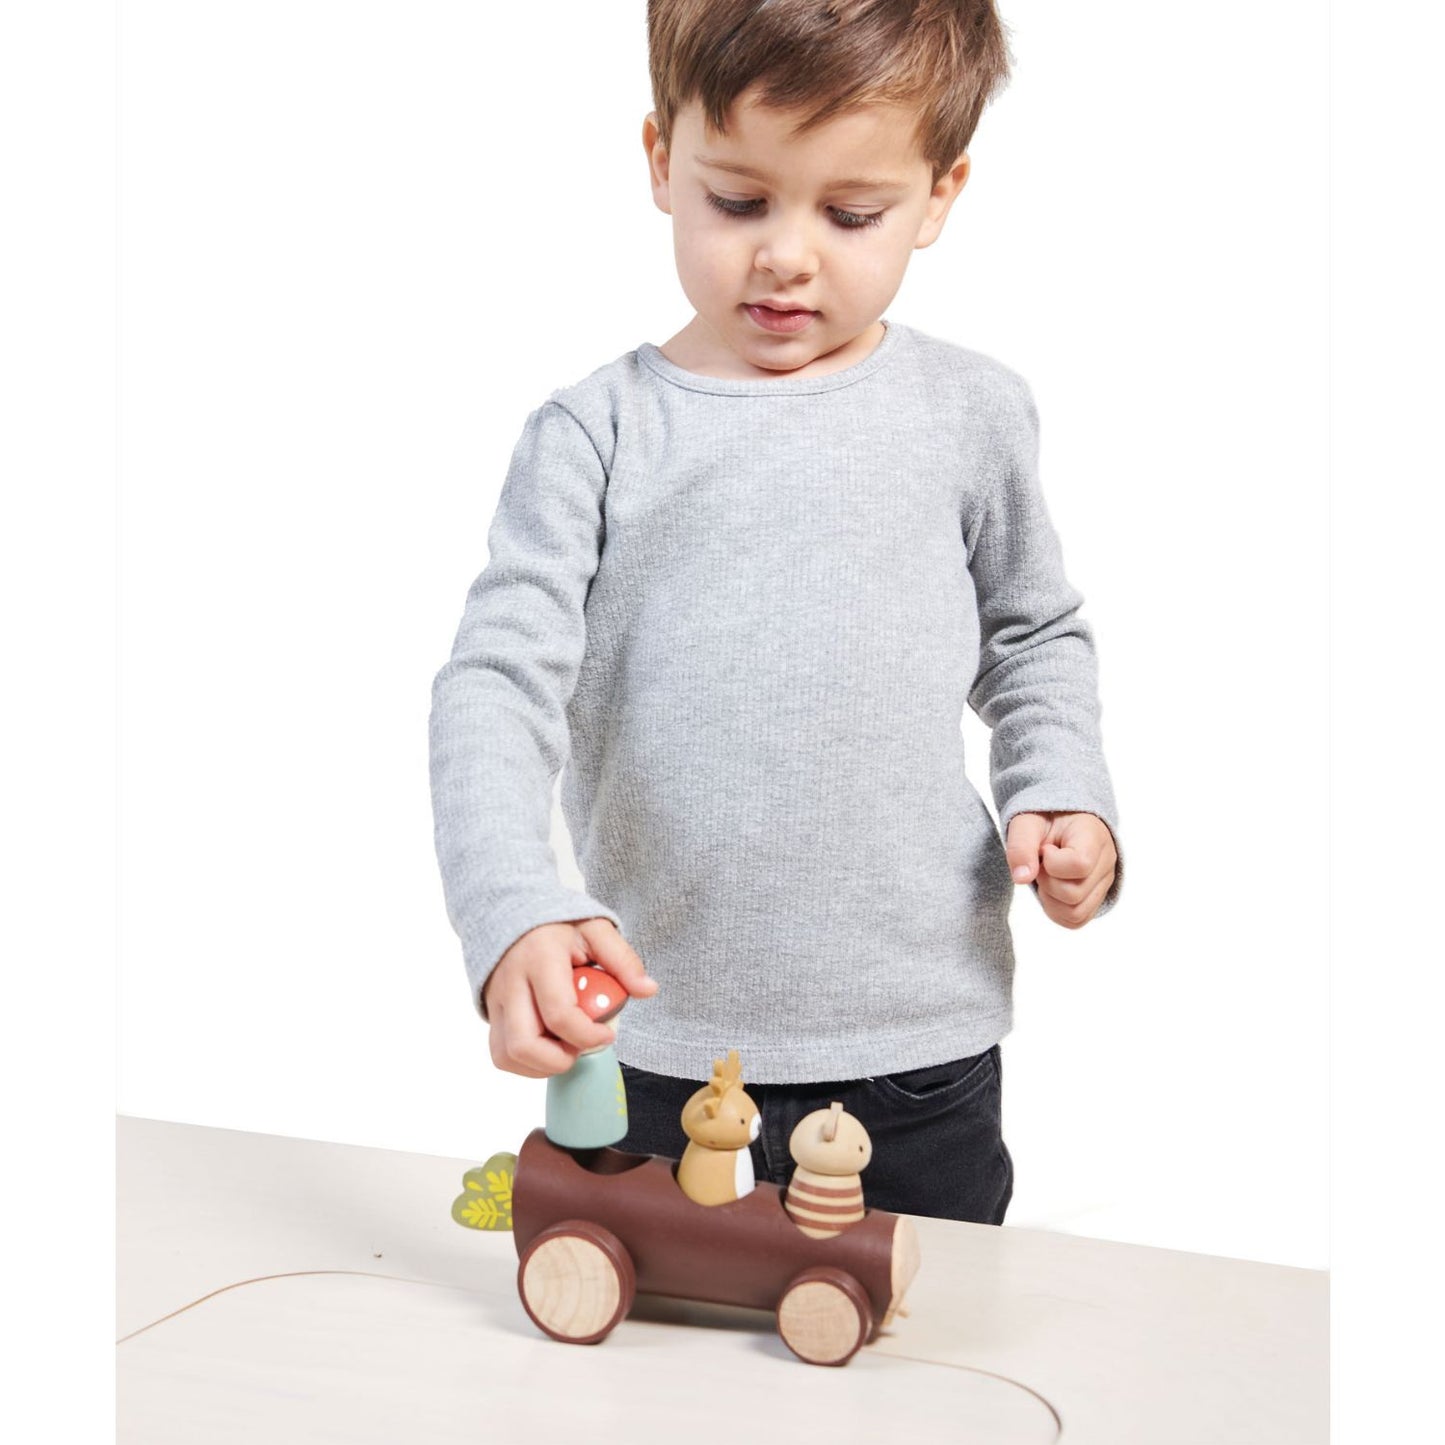 Timber Taxi | Wooden Toy Play Set For Kids